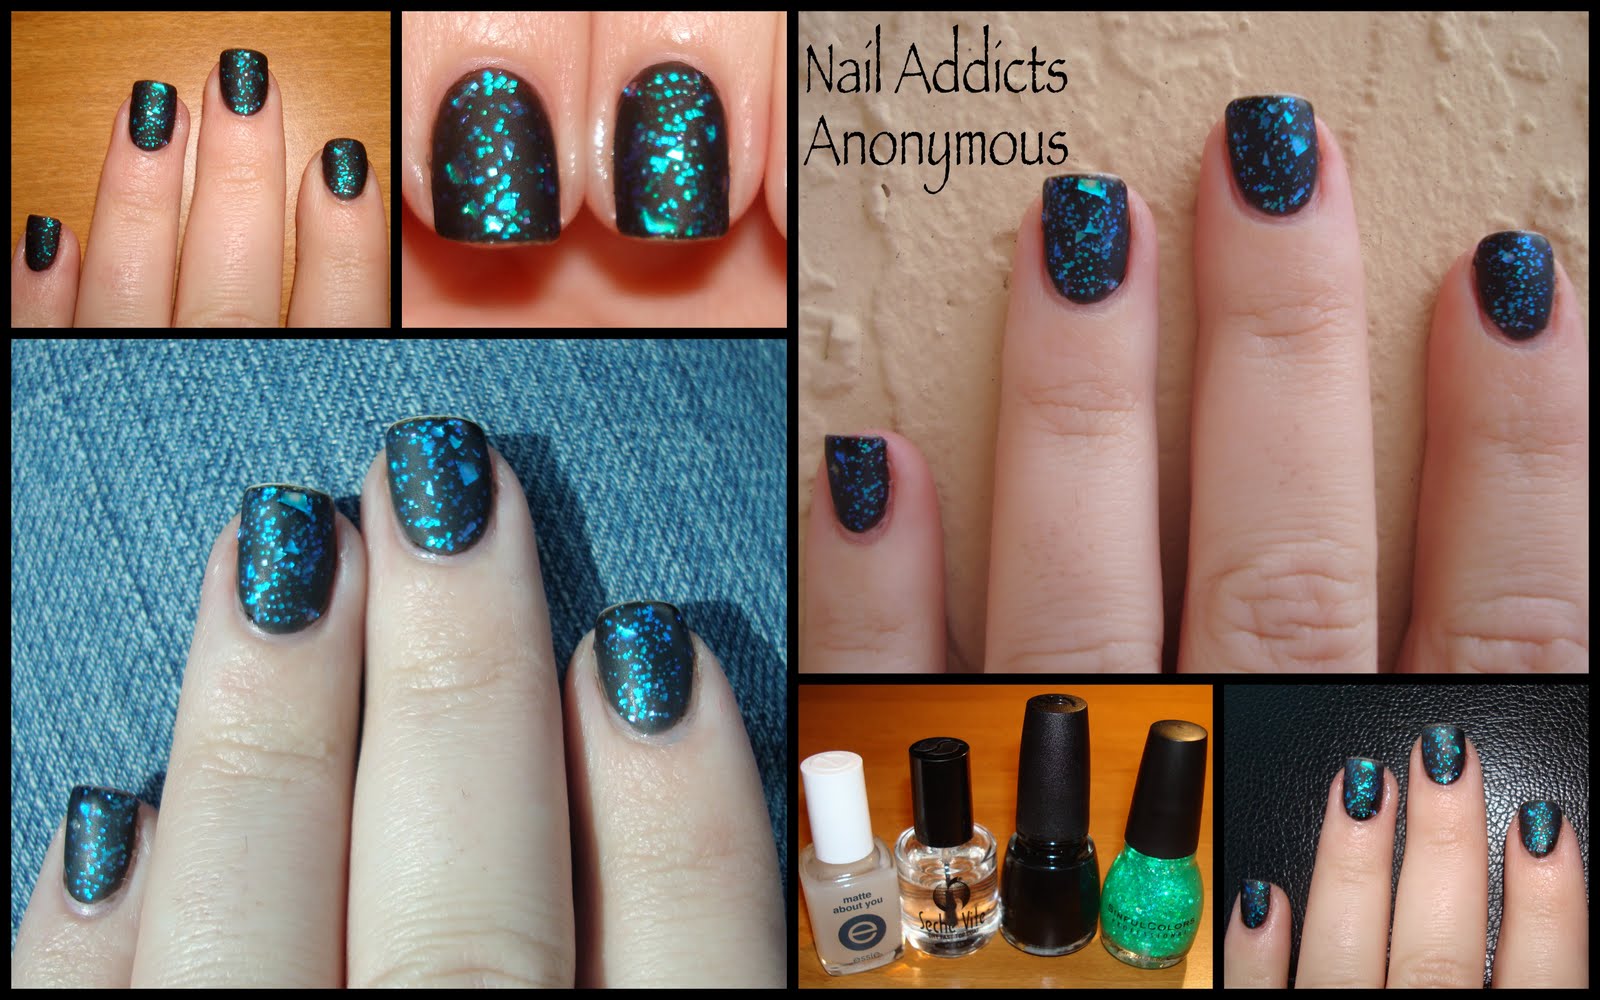 Nail Addicts Anonymous: March 2010